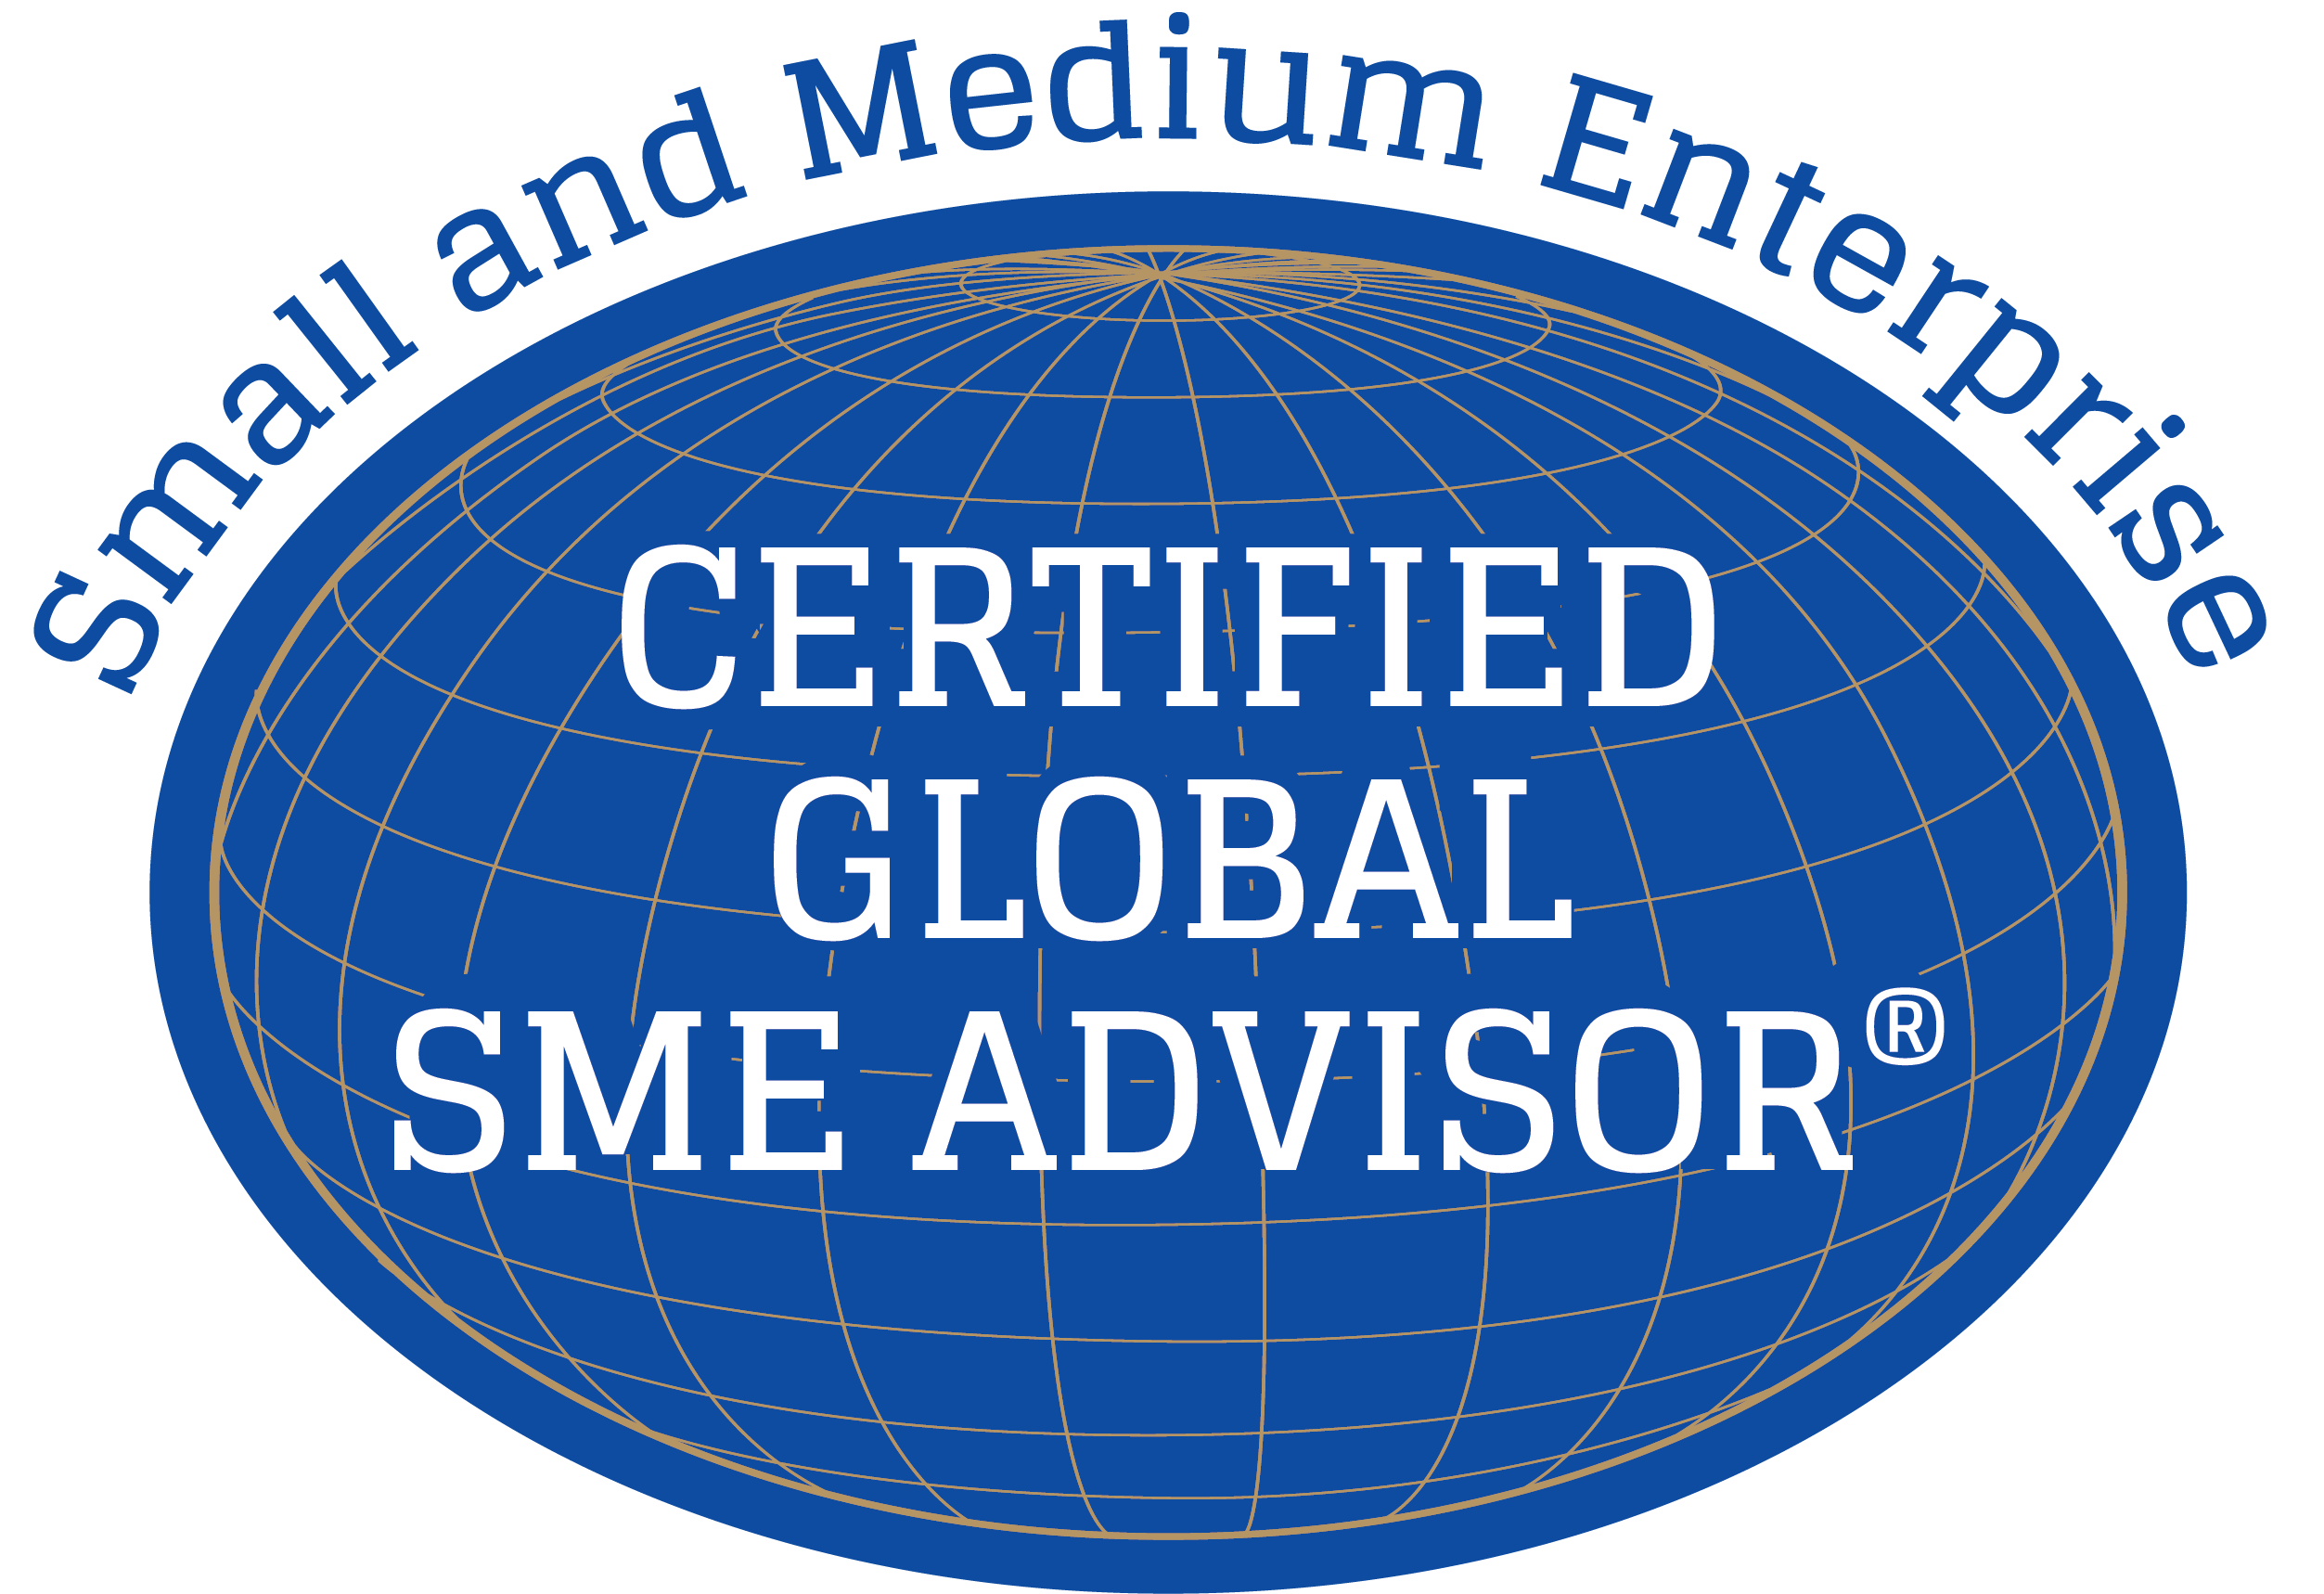 Free Ideas: Articles, Podcasts, Newsletters, Videos by Certified Global SME Advisors